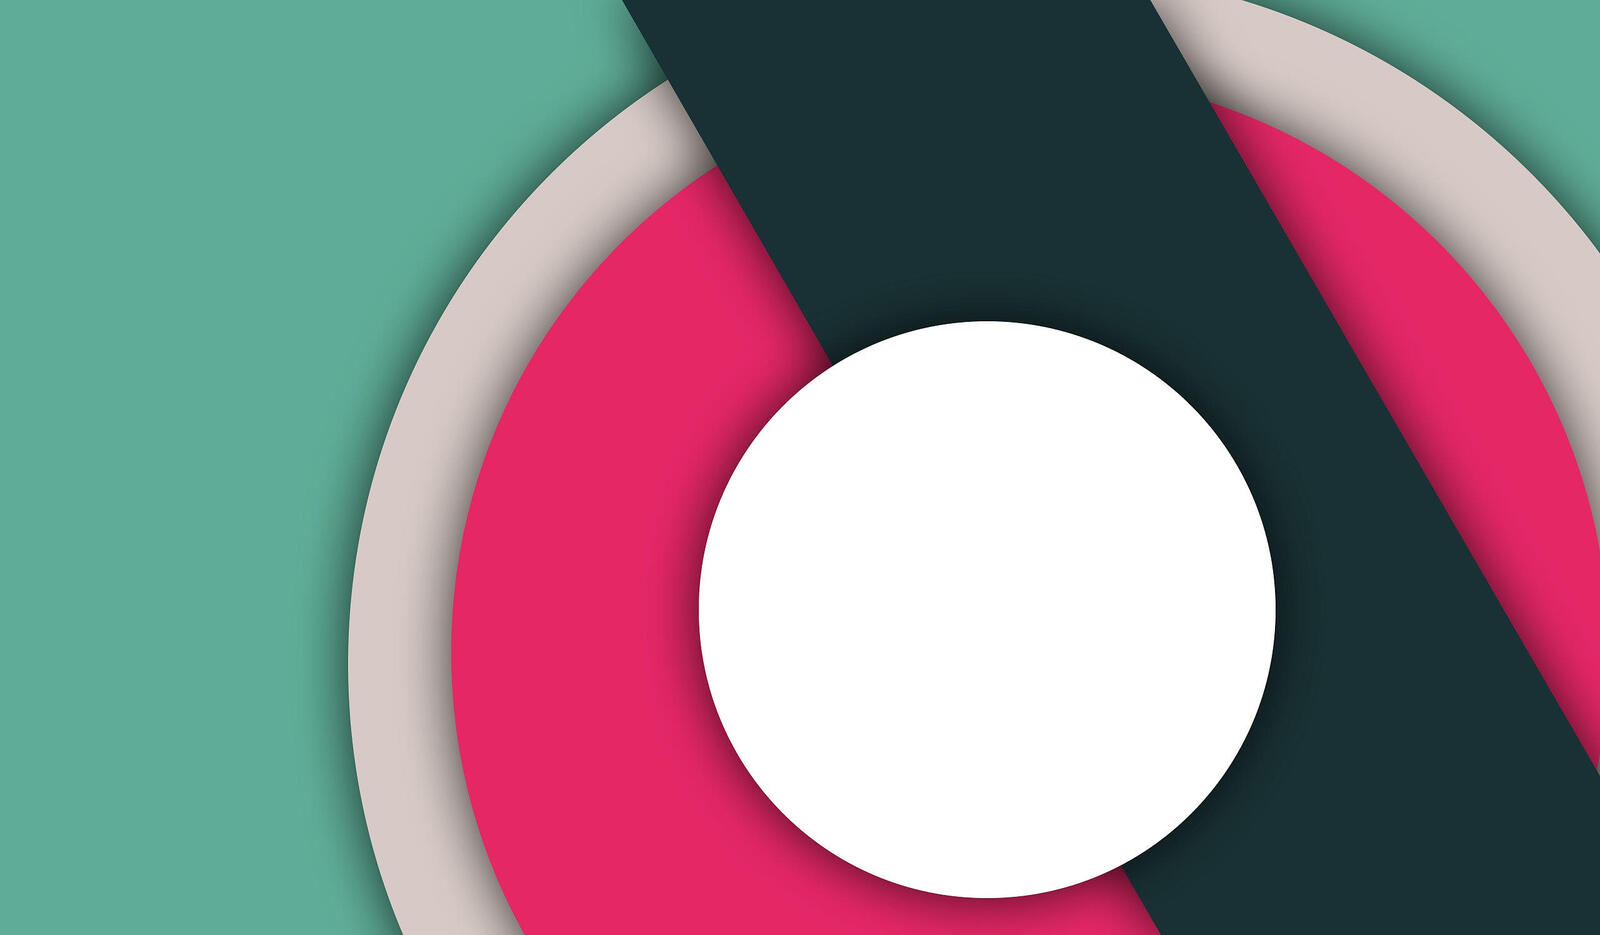 Wallpapers material design abstractions on the desktop